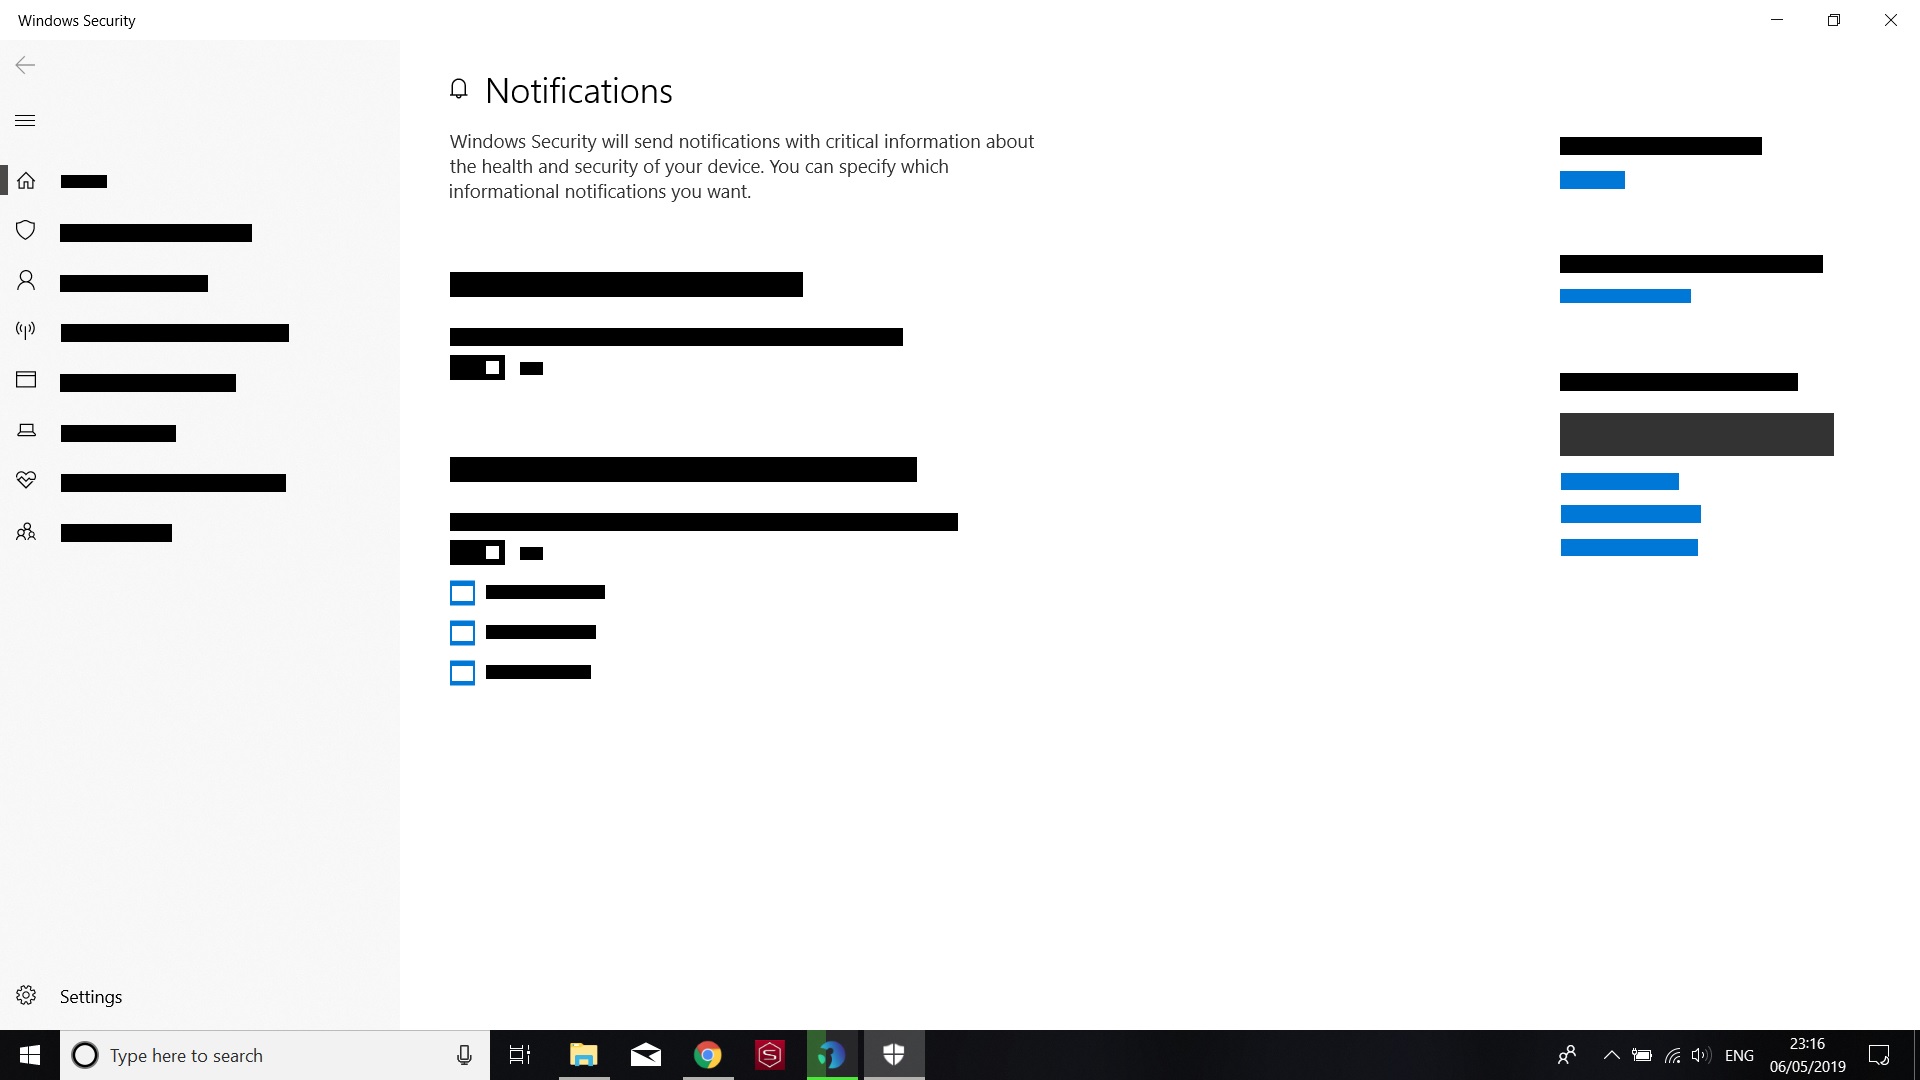 Black squares are blocking out parts of text in windows 10 after factory reset 4e6b3e53-a386-416e-8600-3403d27c3815?upload=true.jpg